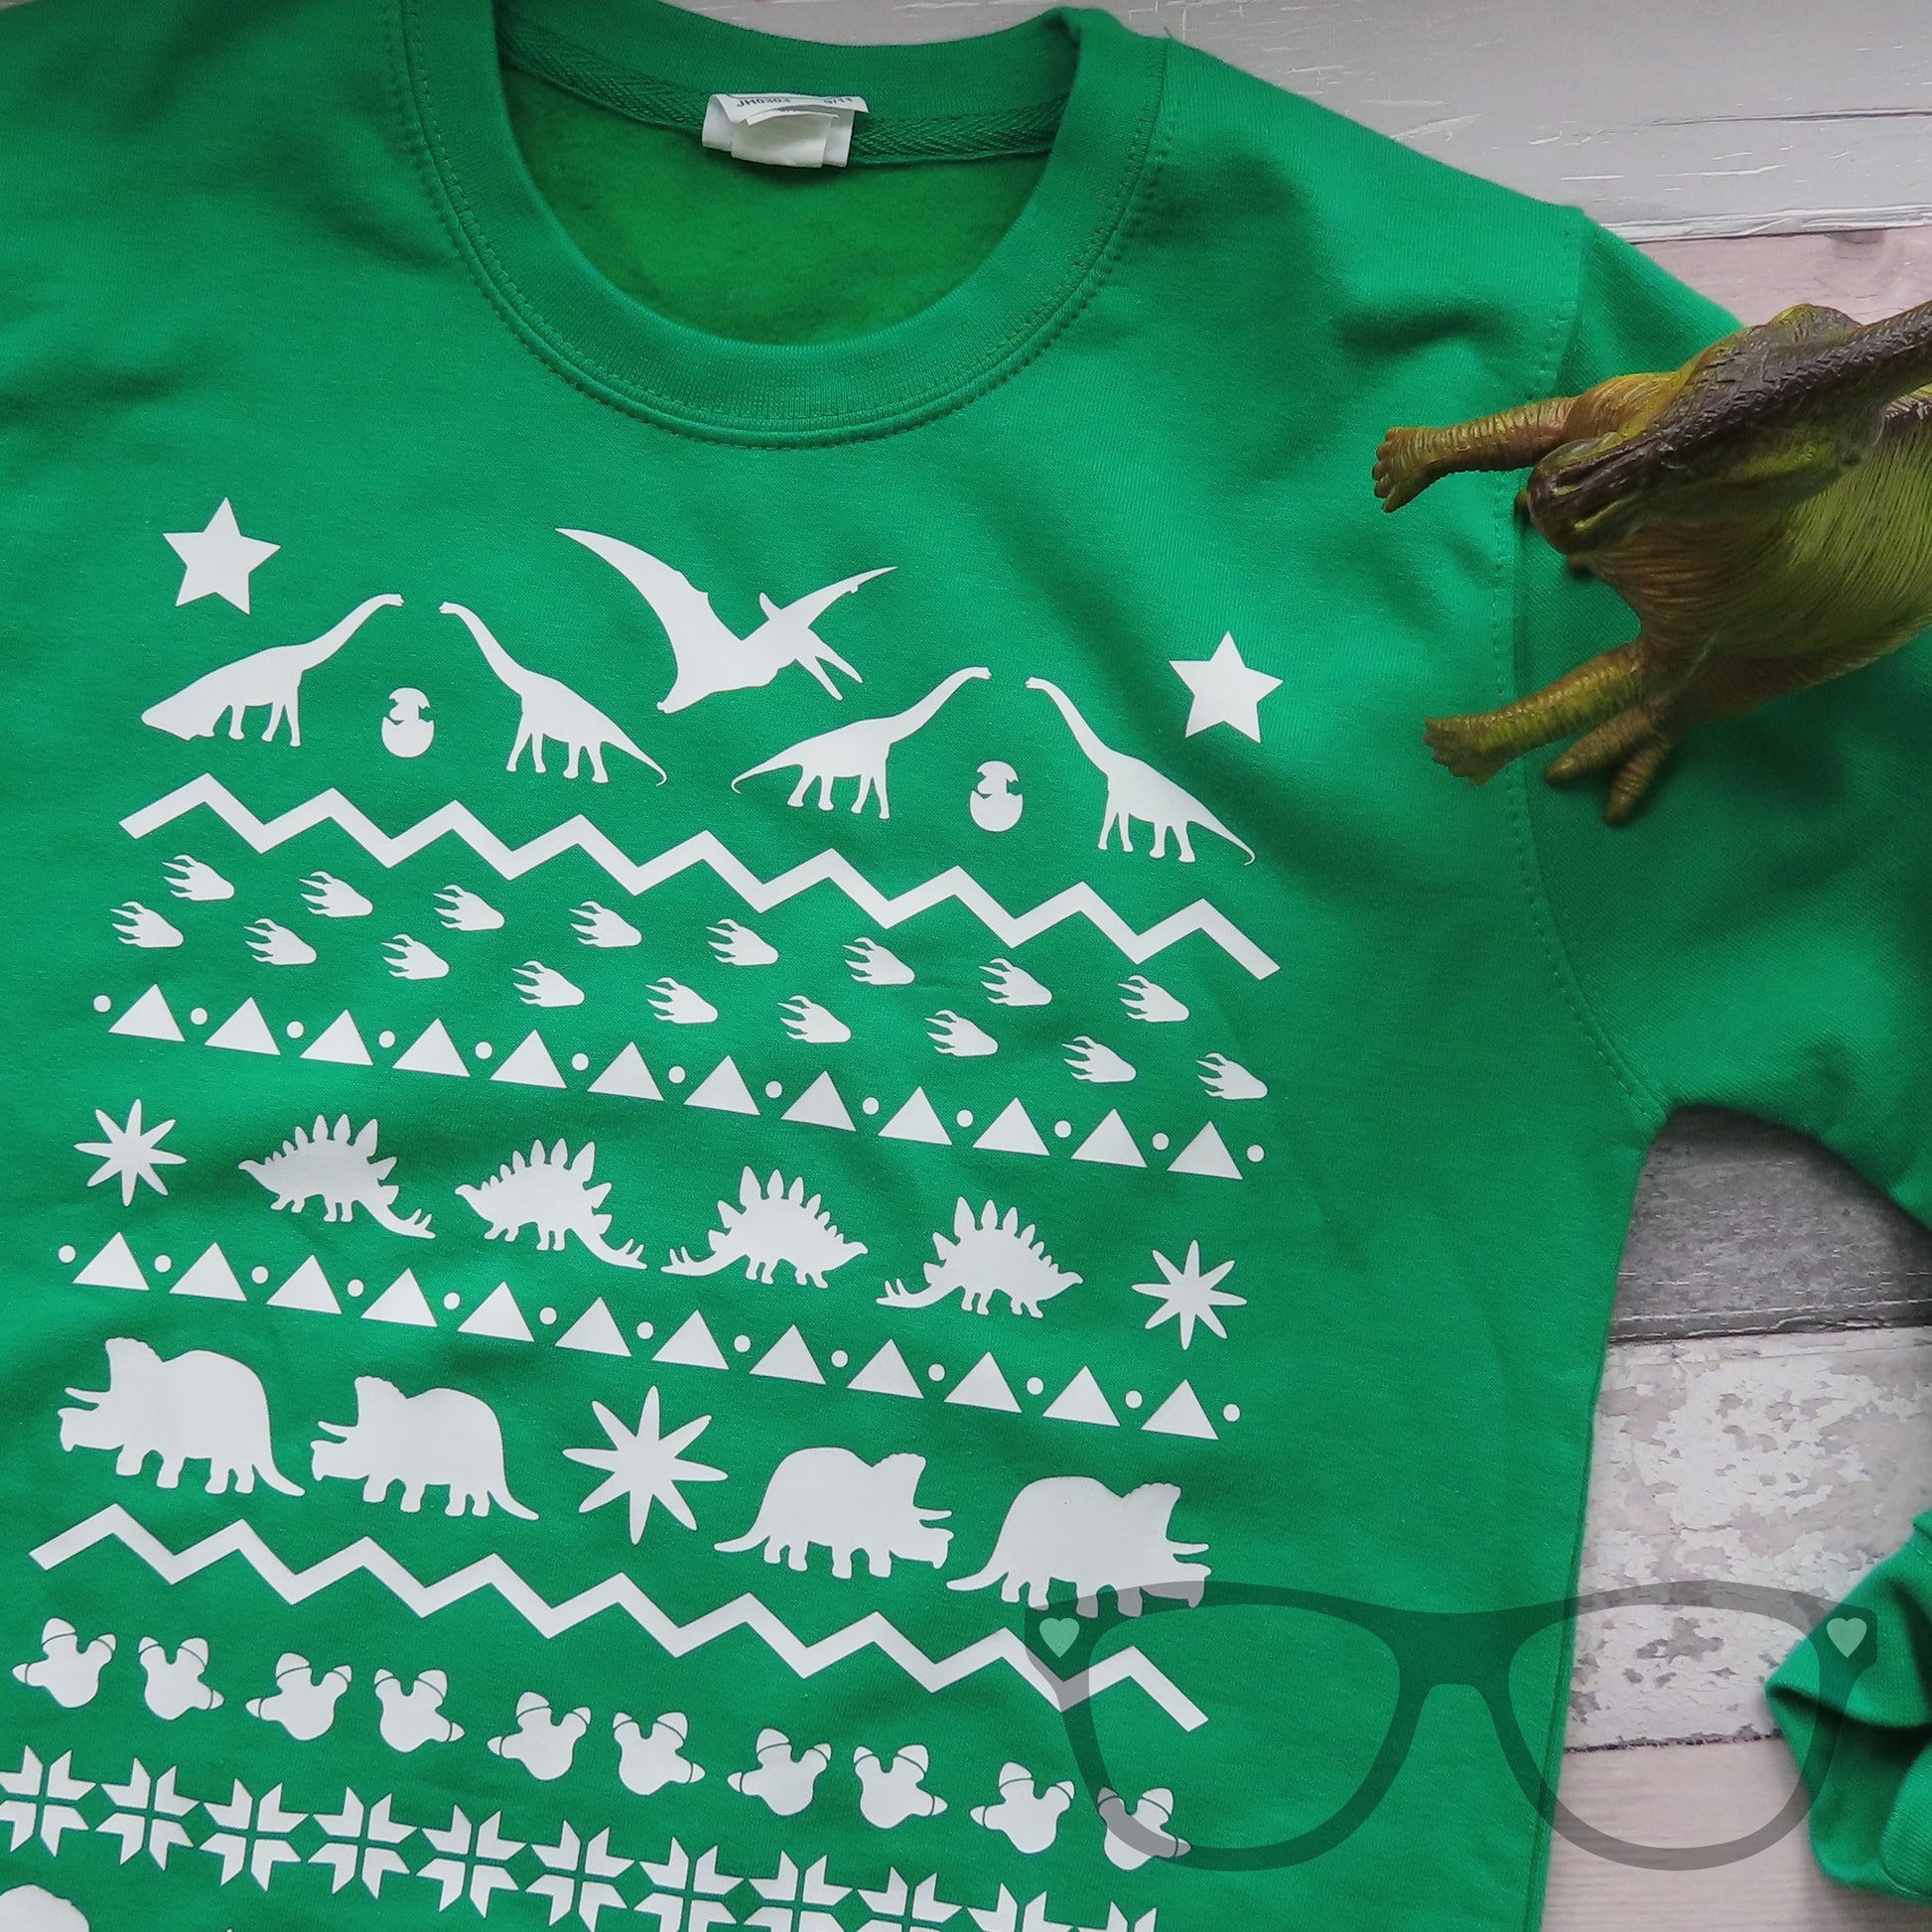 A close up of a green sweater with white dinosaurs heat pressed onto the front. Irene the Parasaurolophus is standing over the jumper.